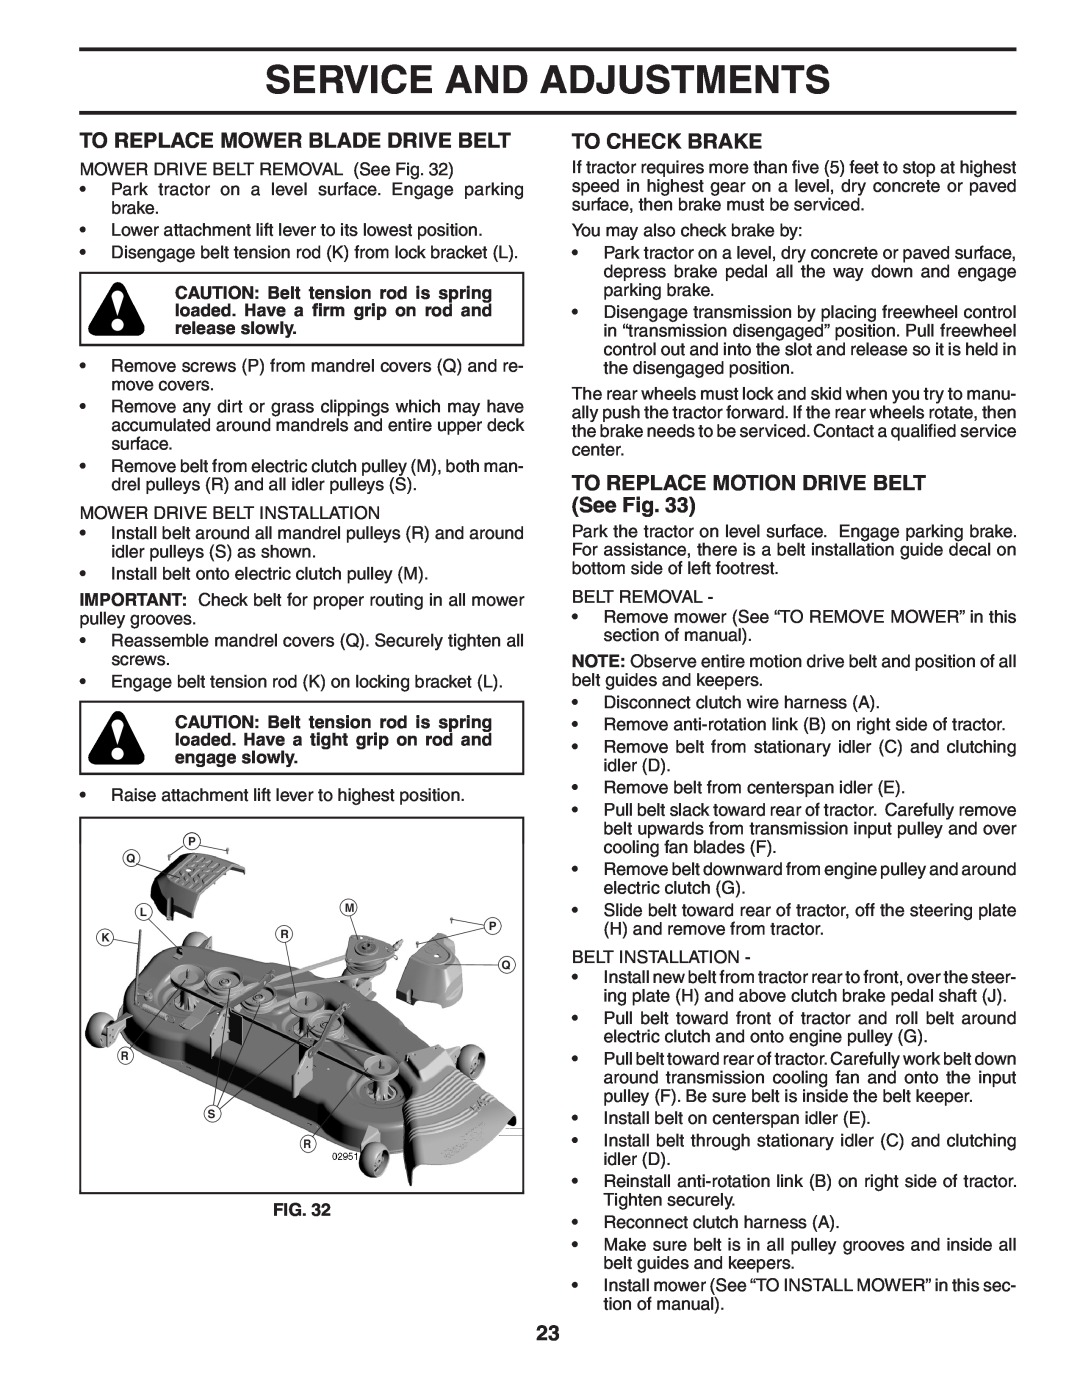 Poulan PBGTGE manual To Replace Mower Blade Drive Belt, To Check Brake, TO REPLACE MOTION DRIVE BELT See Fig 